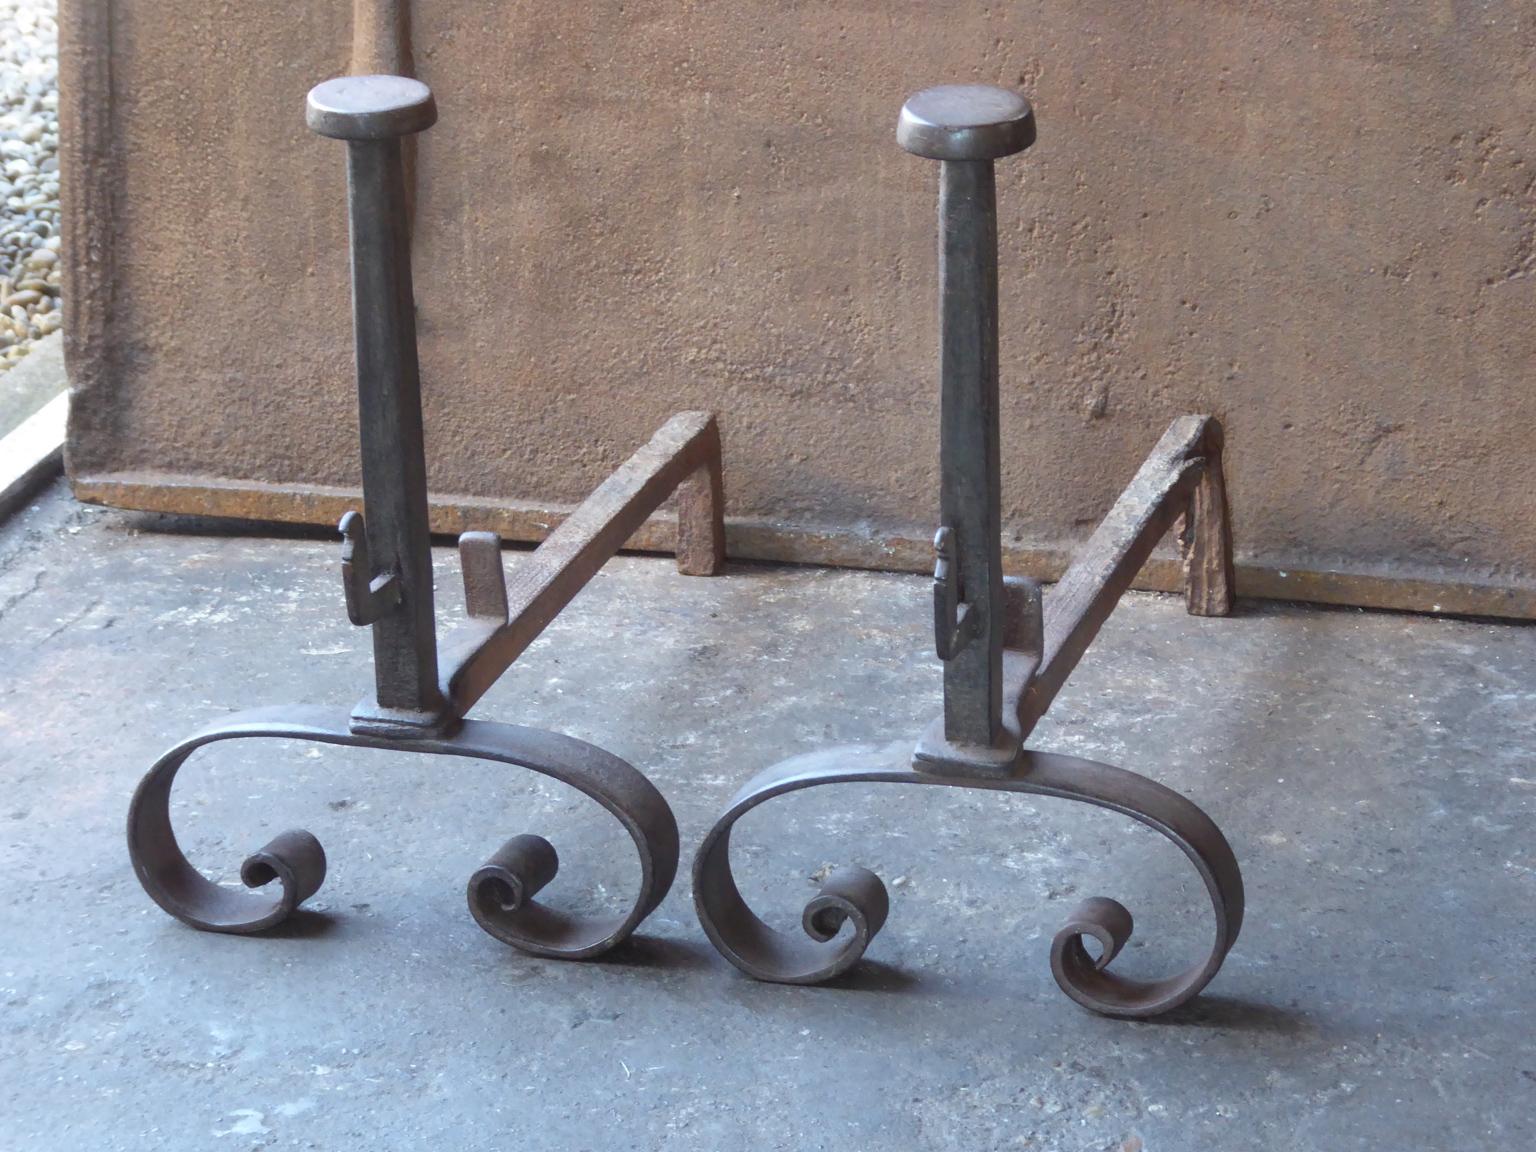 19th century French Napoleon III andirons period made of hand forged wrought iron. The andirons are in a good condition and fit for use in the fireplace.